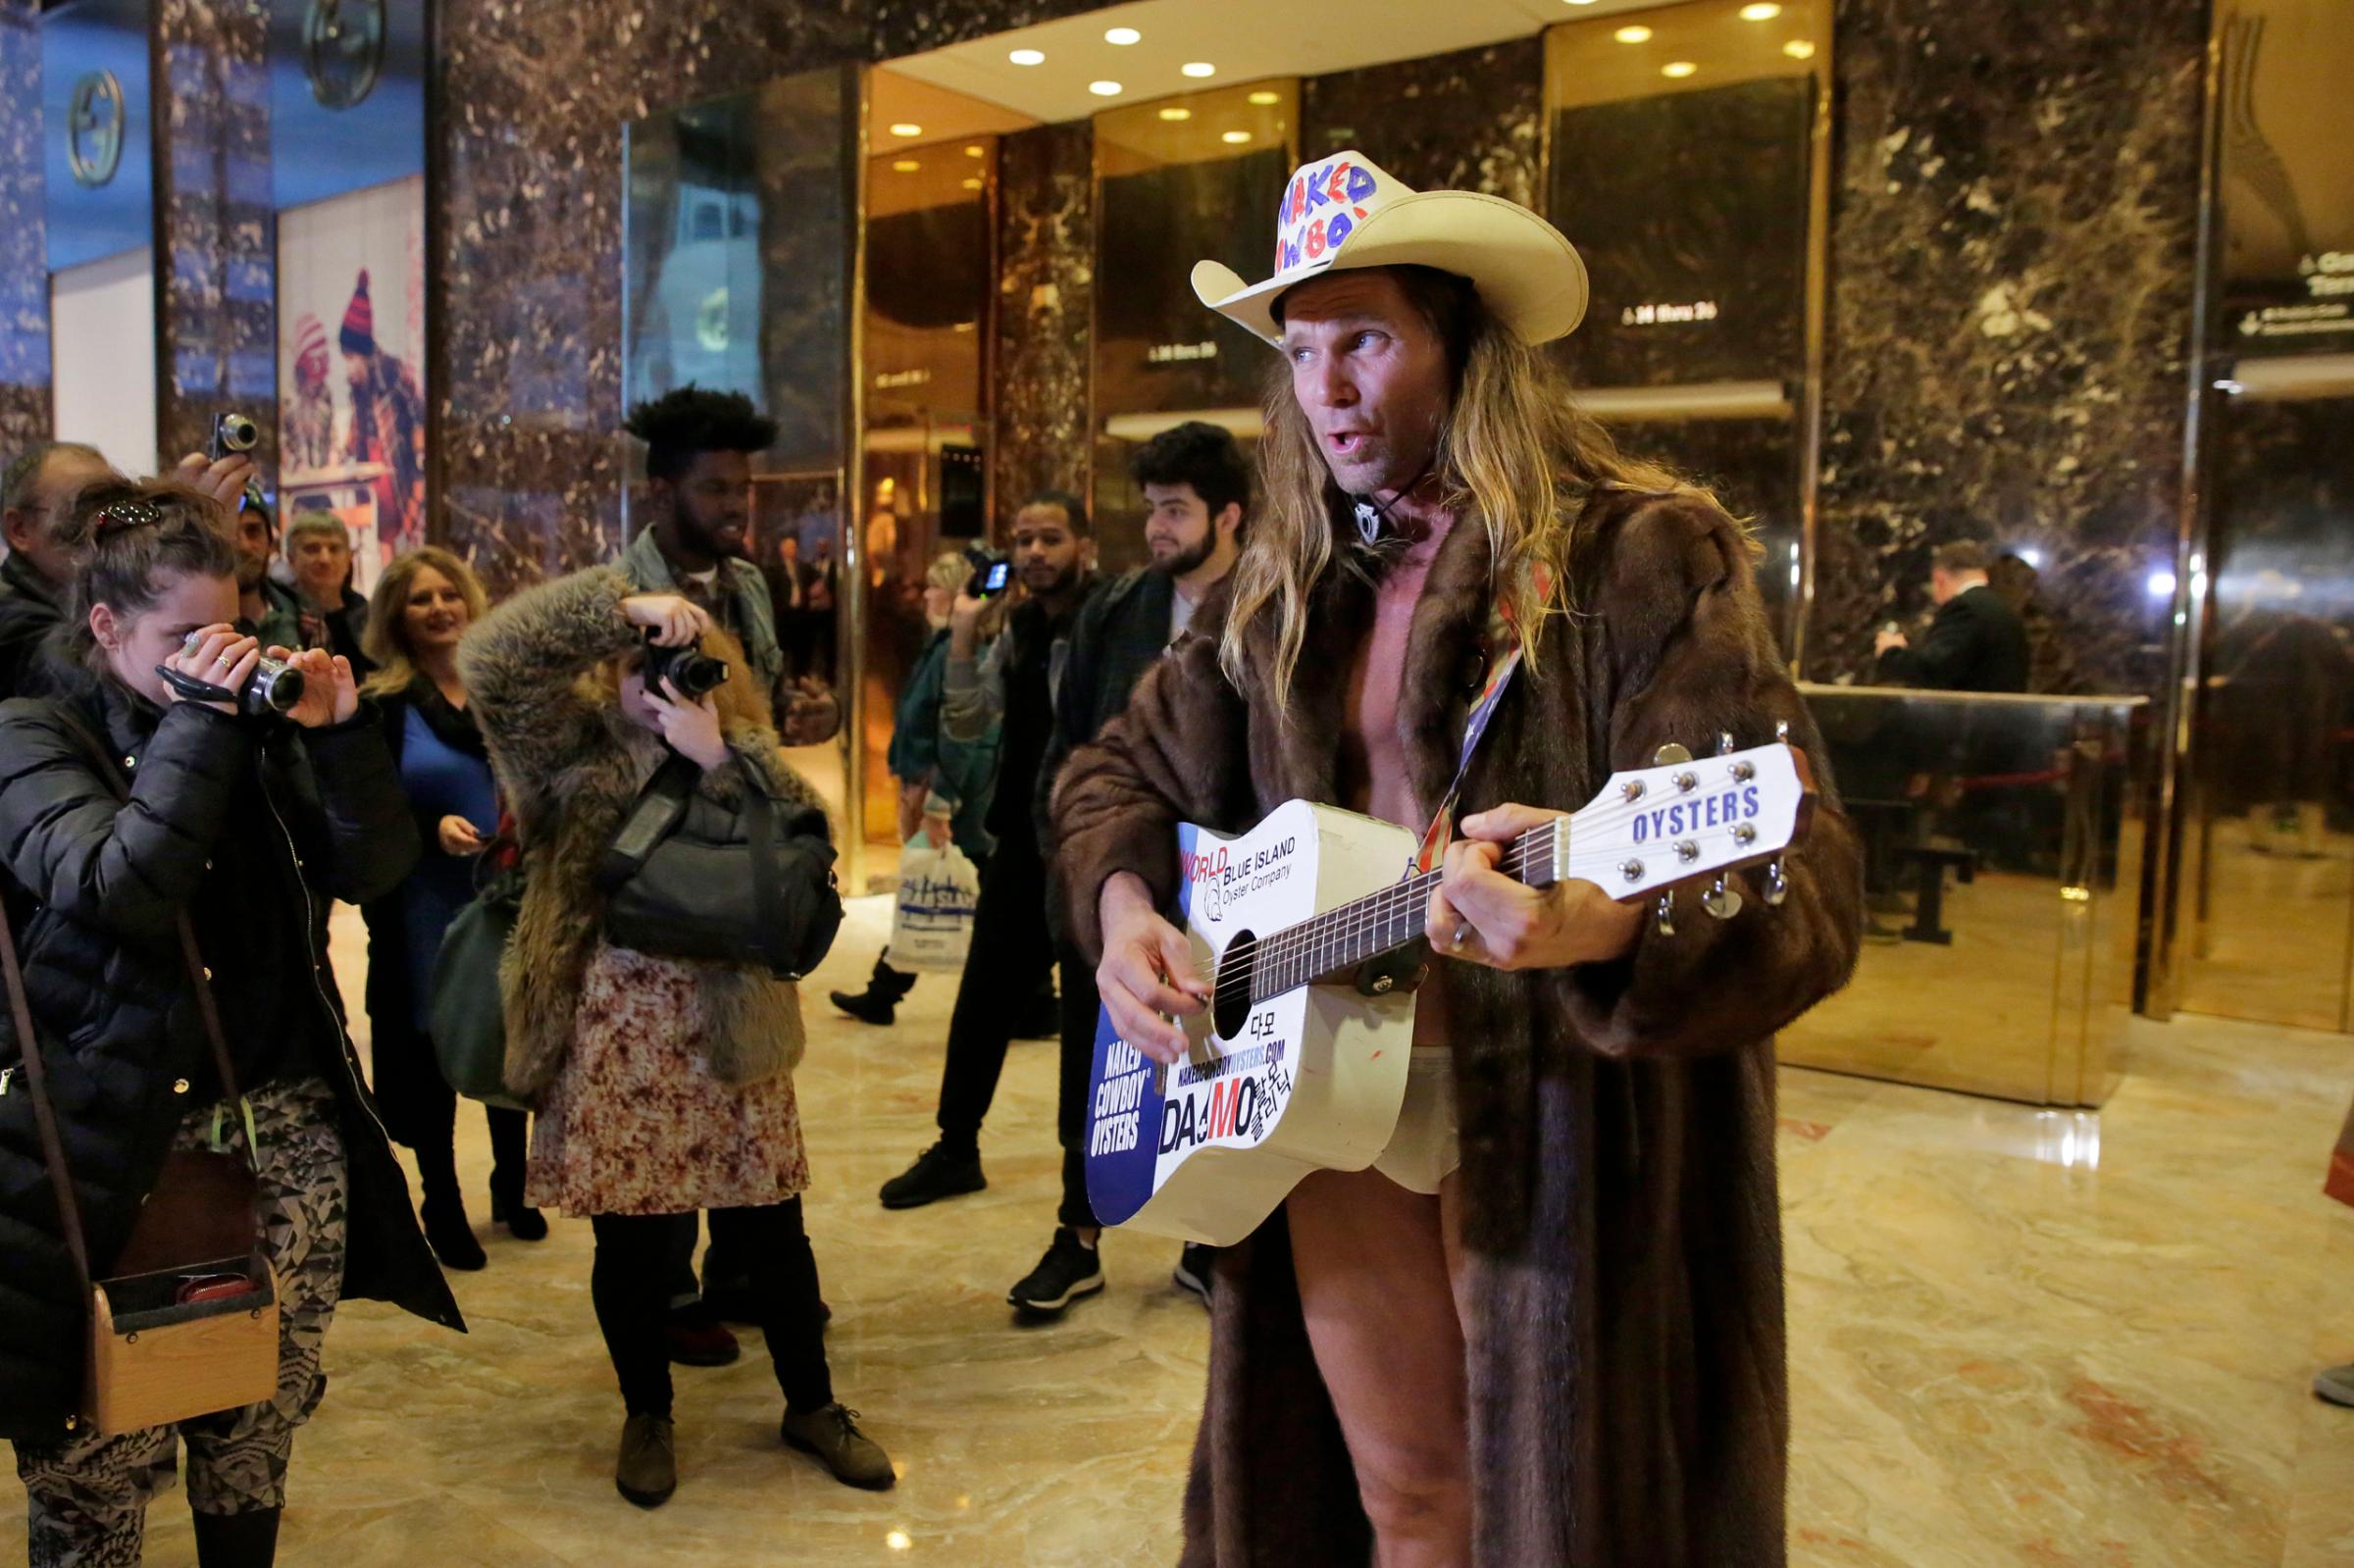 Robert Burck, who portrays the Naked Cowboy, performs a Trump-themed song in the lobby of Trump Tower in New York, on Nov. 18, 2016.